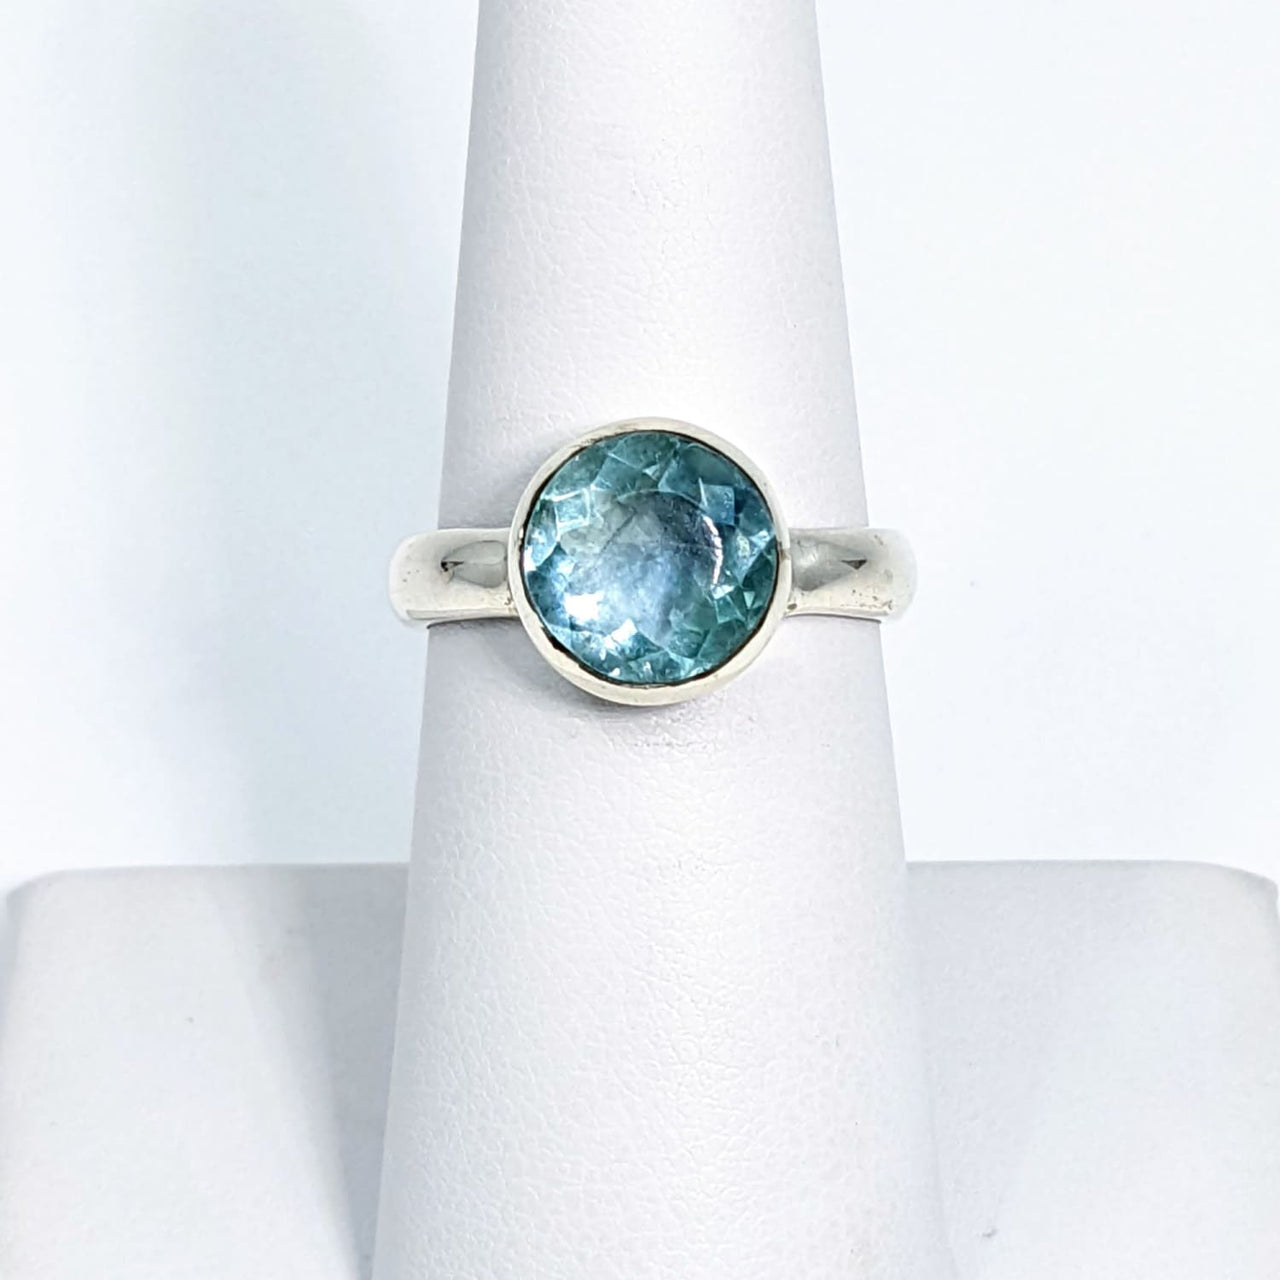 Blue Fluorite Faceted Ring Sz 6.5 #SK9146 - $69